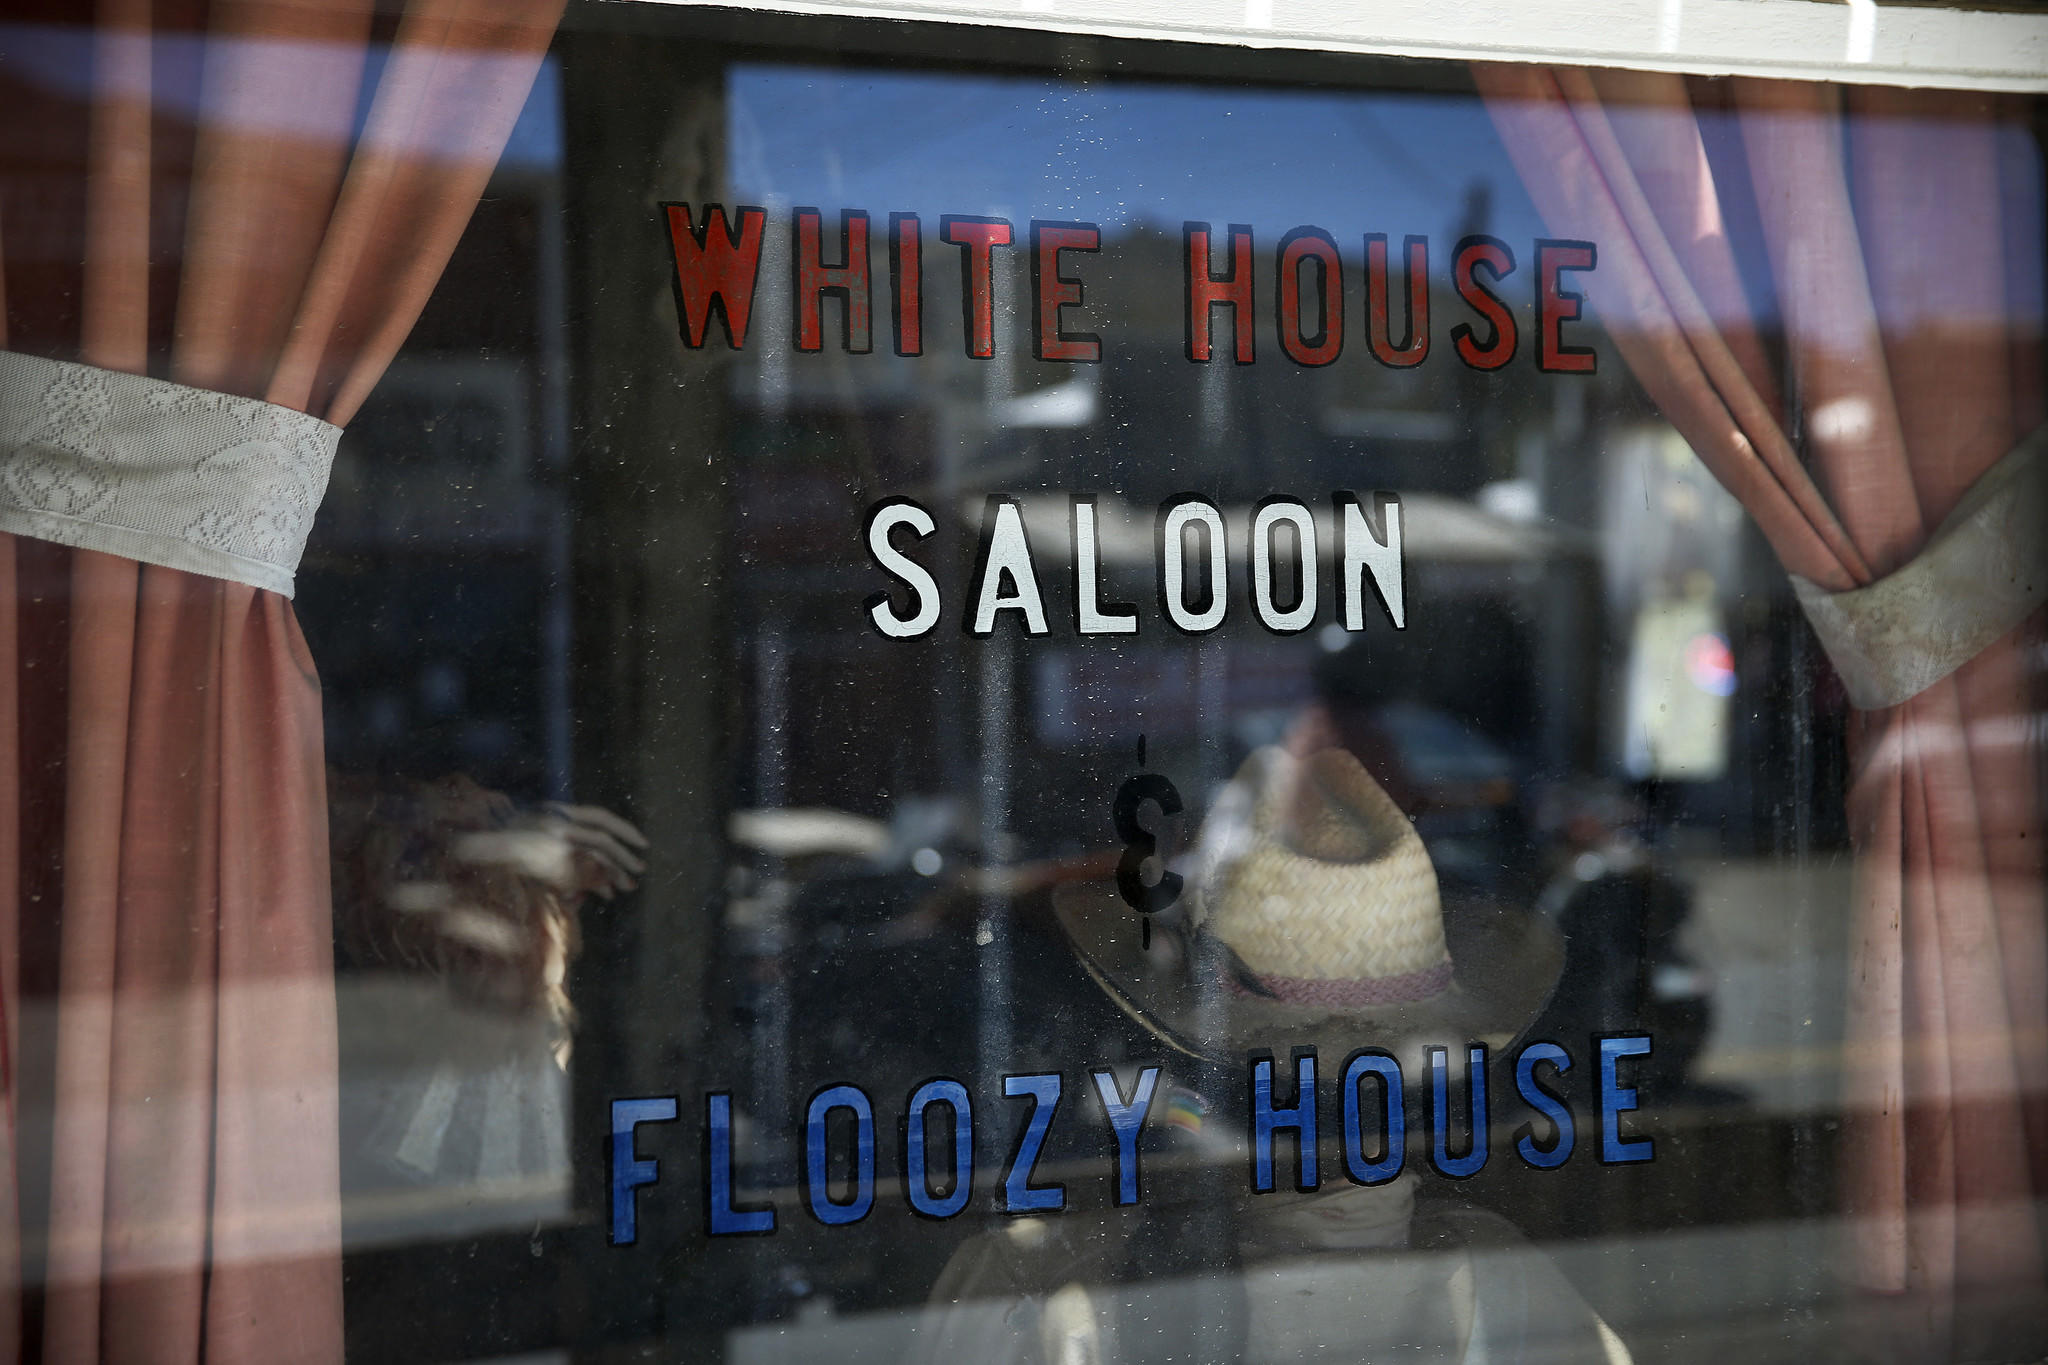 A view of the window display at the White House Saloon in downtown Randsburg.